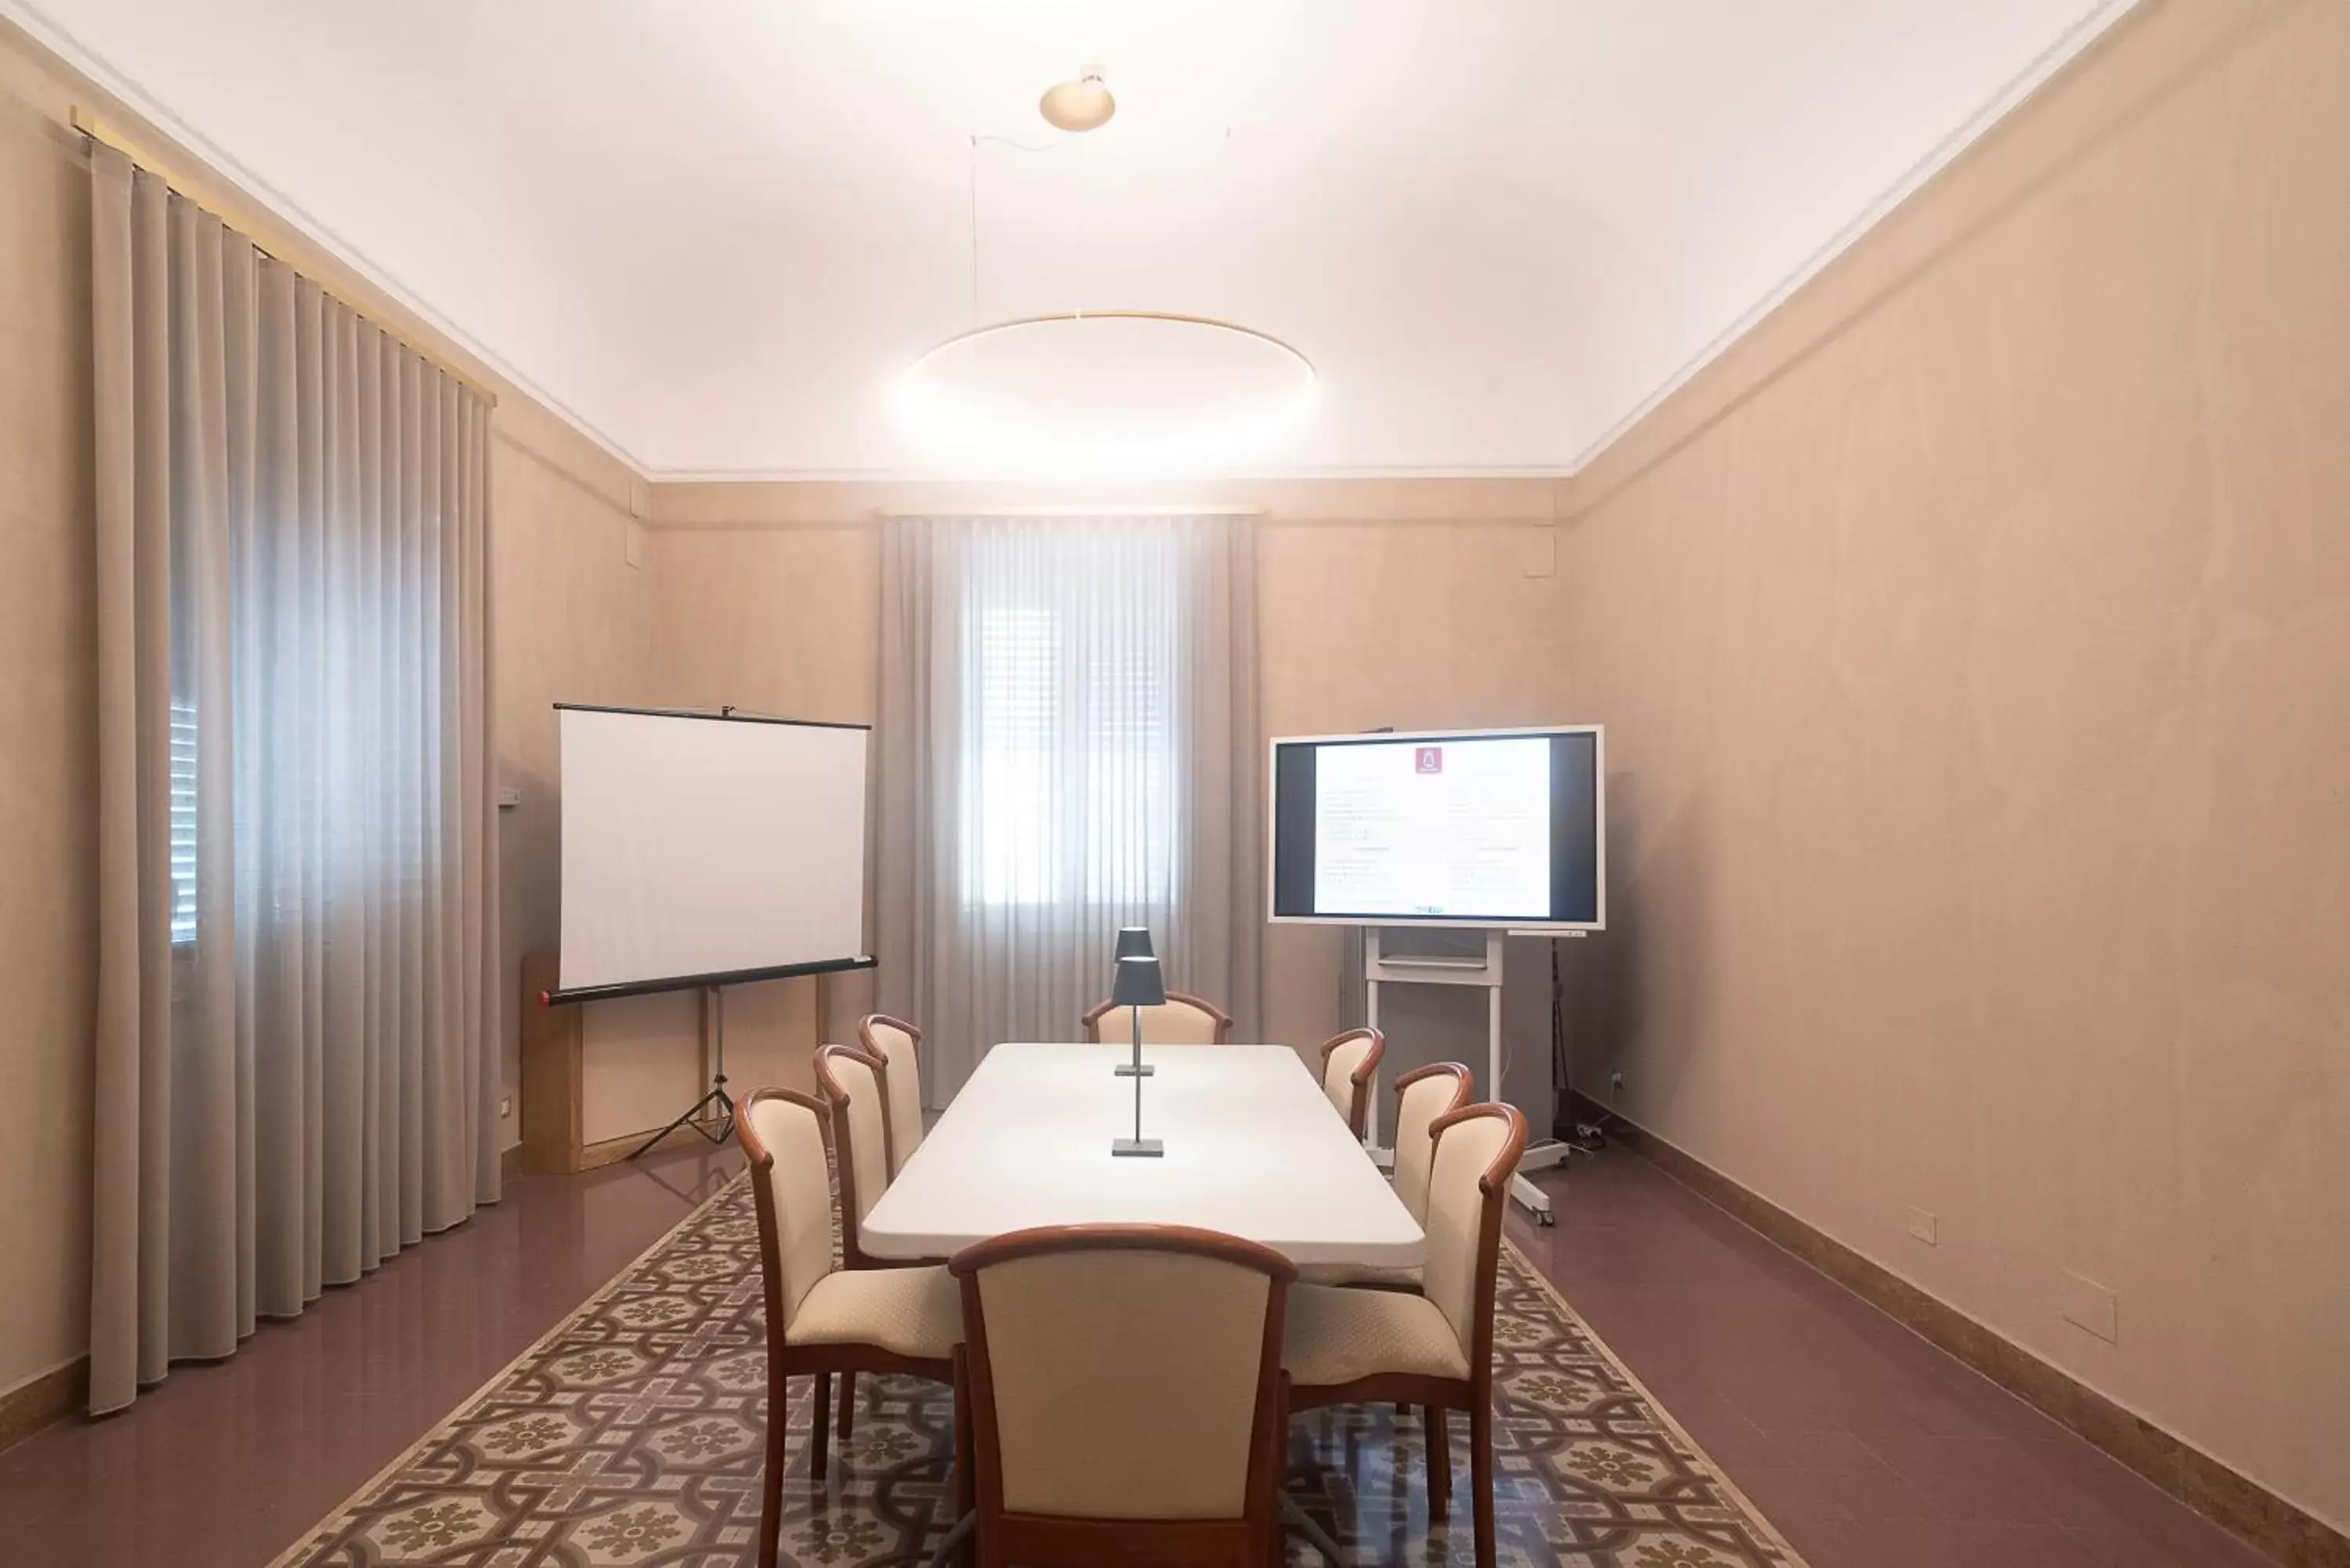 Meeting/conference room in Hotel Tonic